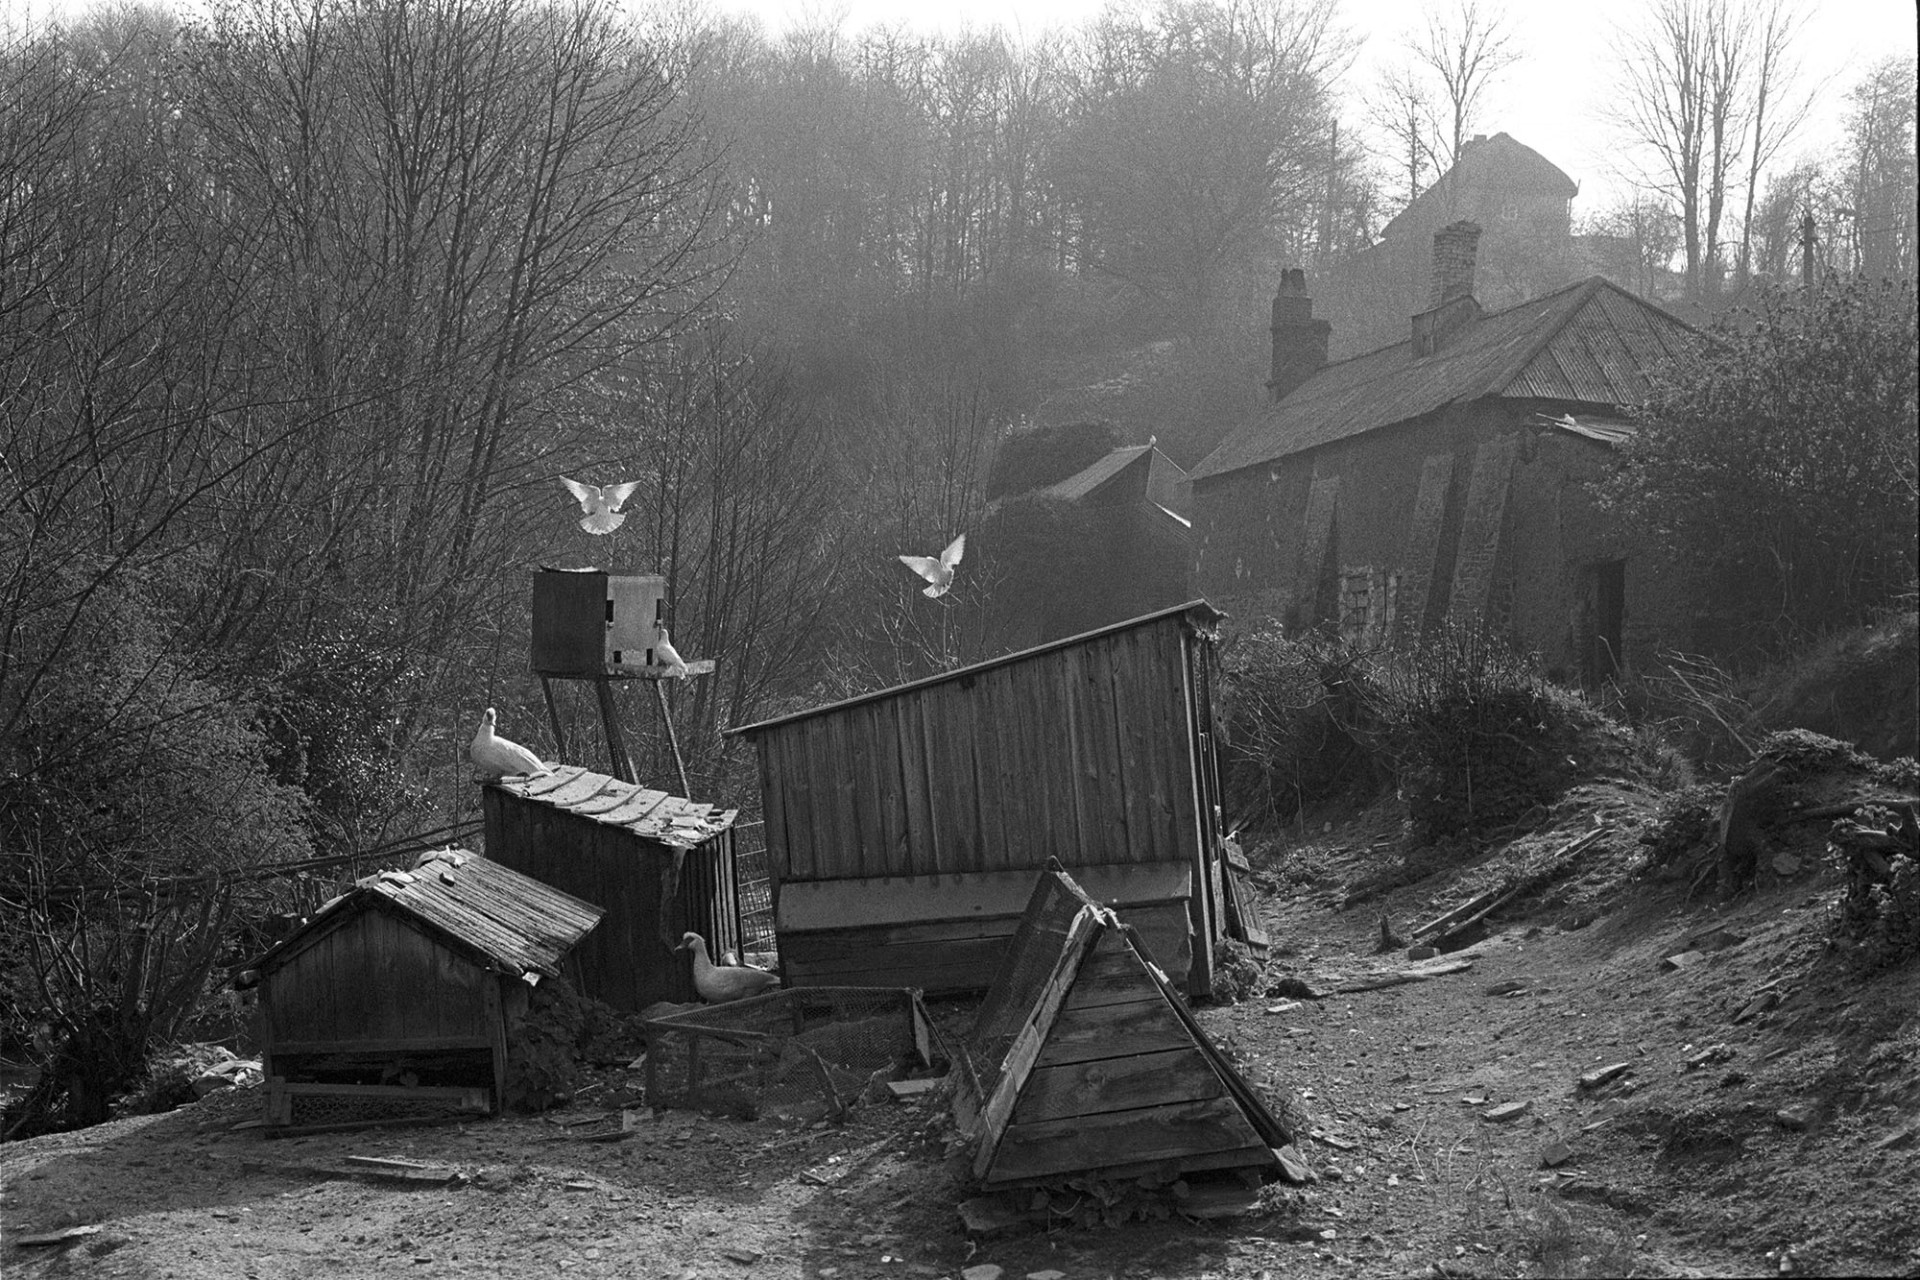 Poultry houses with doves and chickens. 
[Poultry houses of different shapes and sizes, and a dove cot, with ducks and doves at Millhams, Dolton. Trees, small buildings, and a cottage are in the background.]